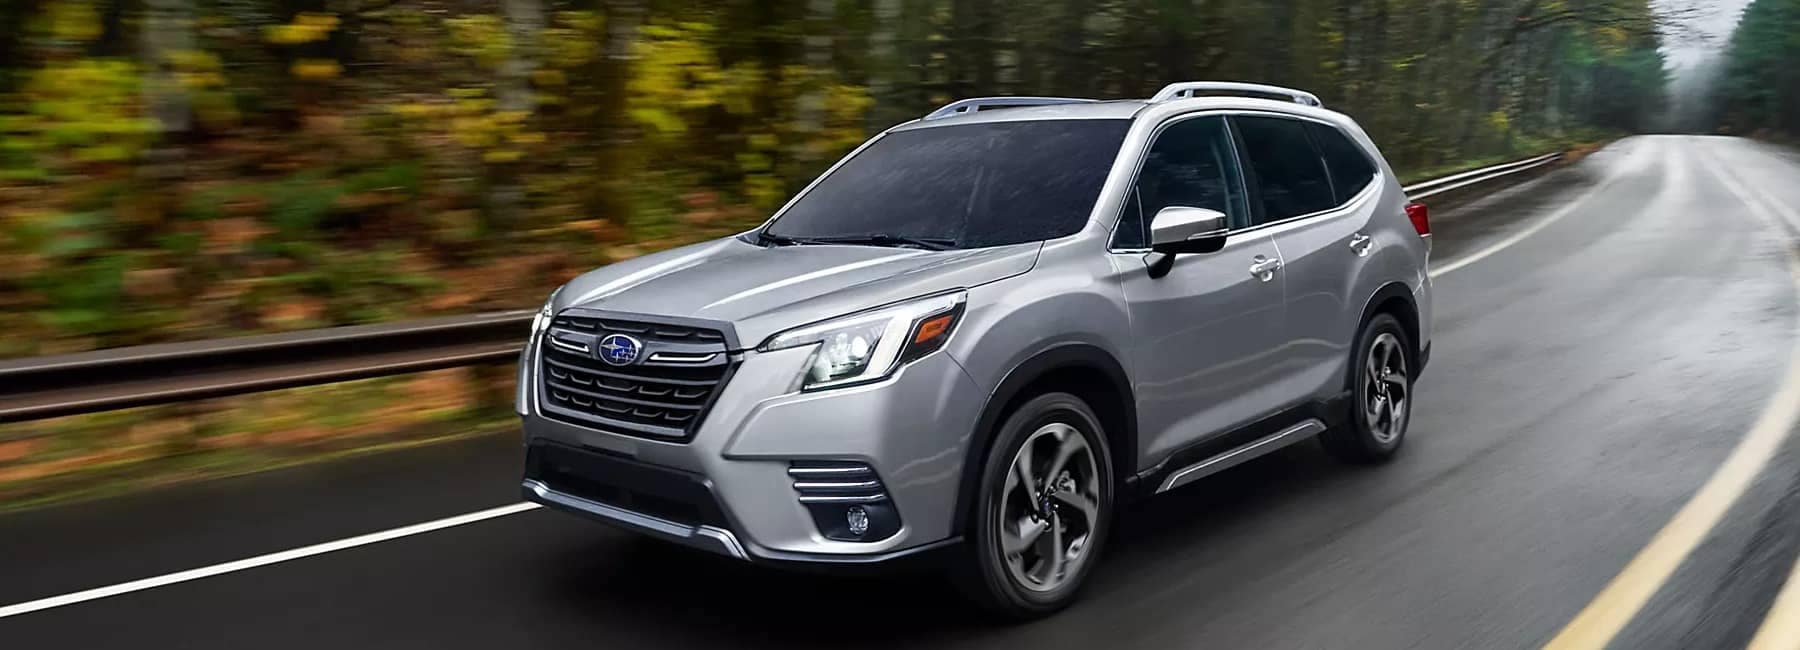 2022 Subaru Forester- front-3qview driving highway- blurred forest background-silver